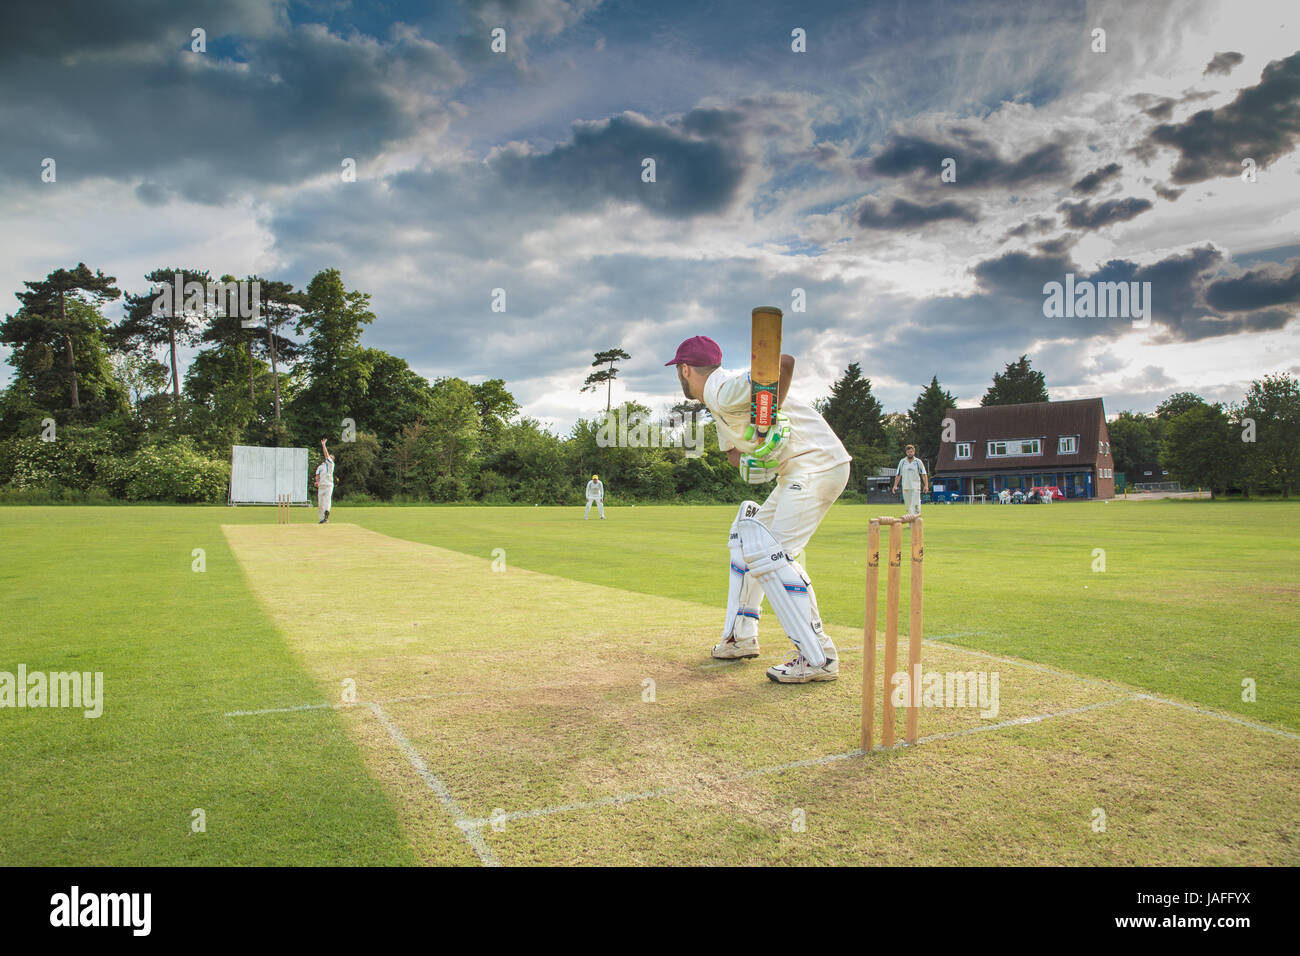 Close Up Of Cricket batsman from behind the stumps Stock Photo